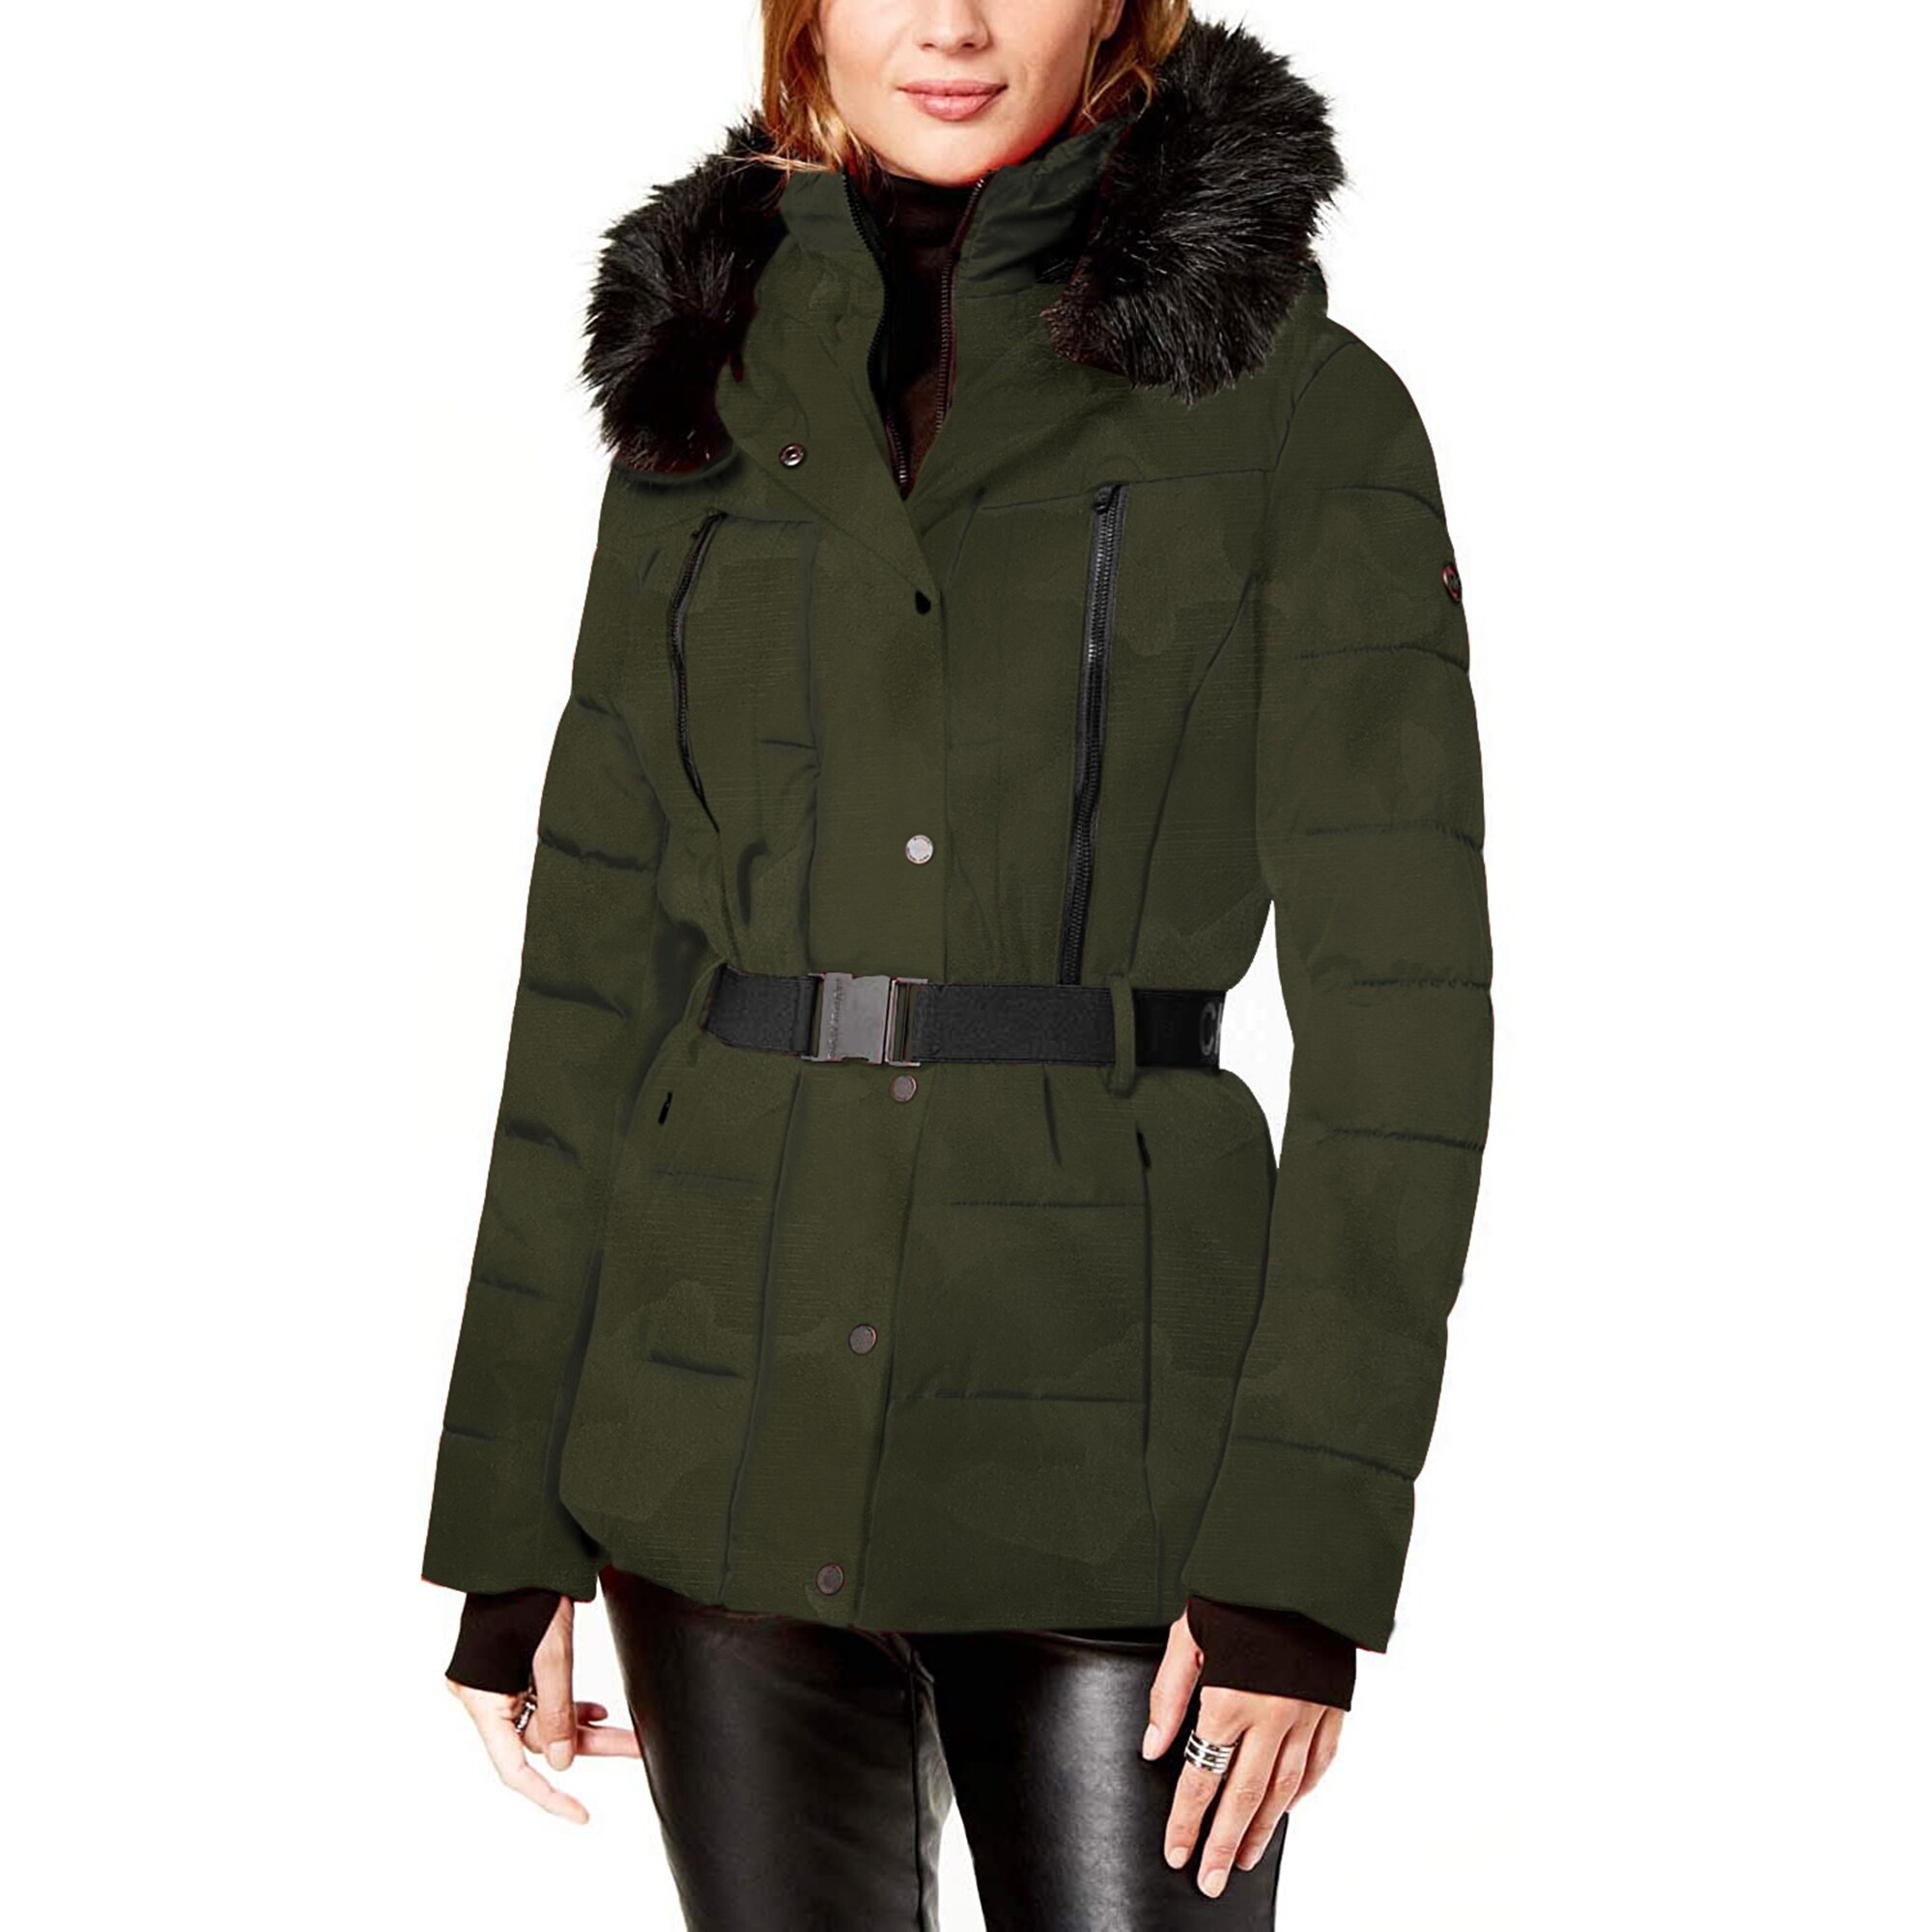 Michael Kors Green Puffer Jacket Luxembourg, SAVE 53% 